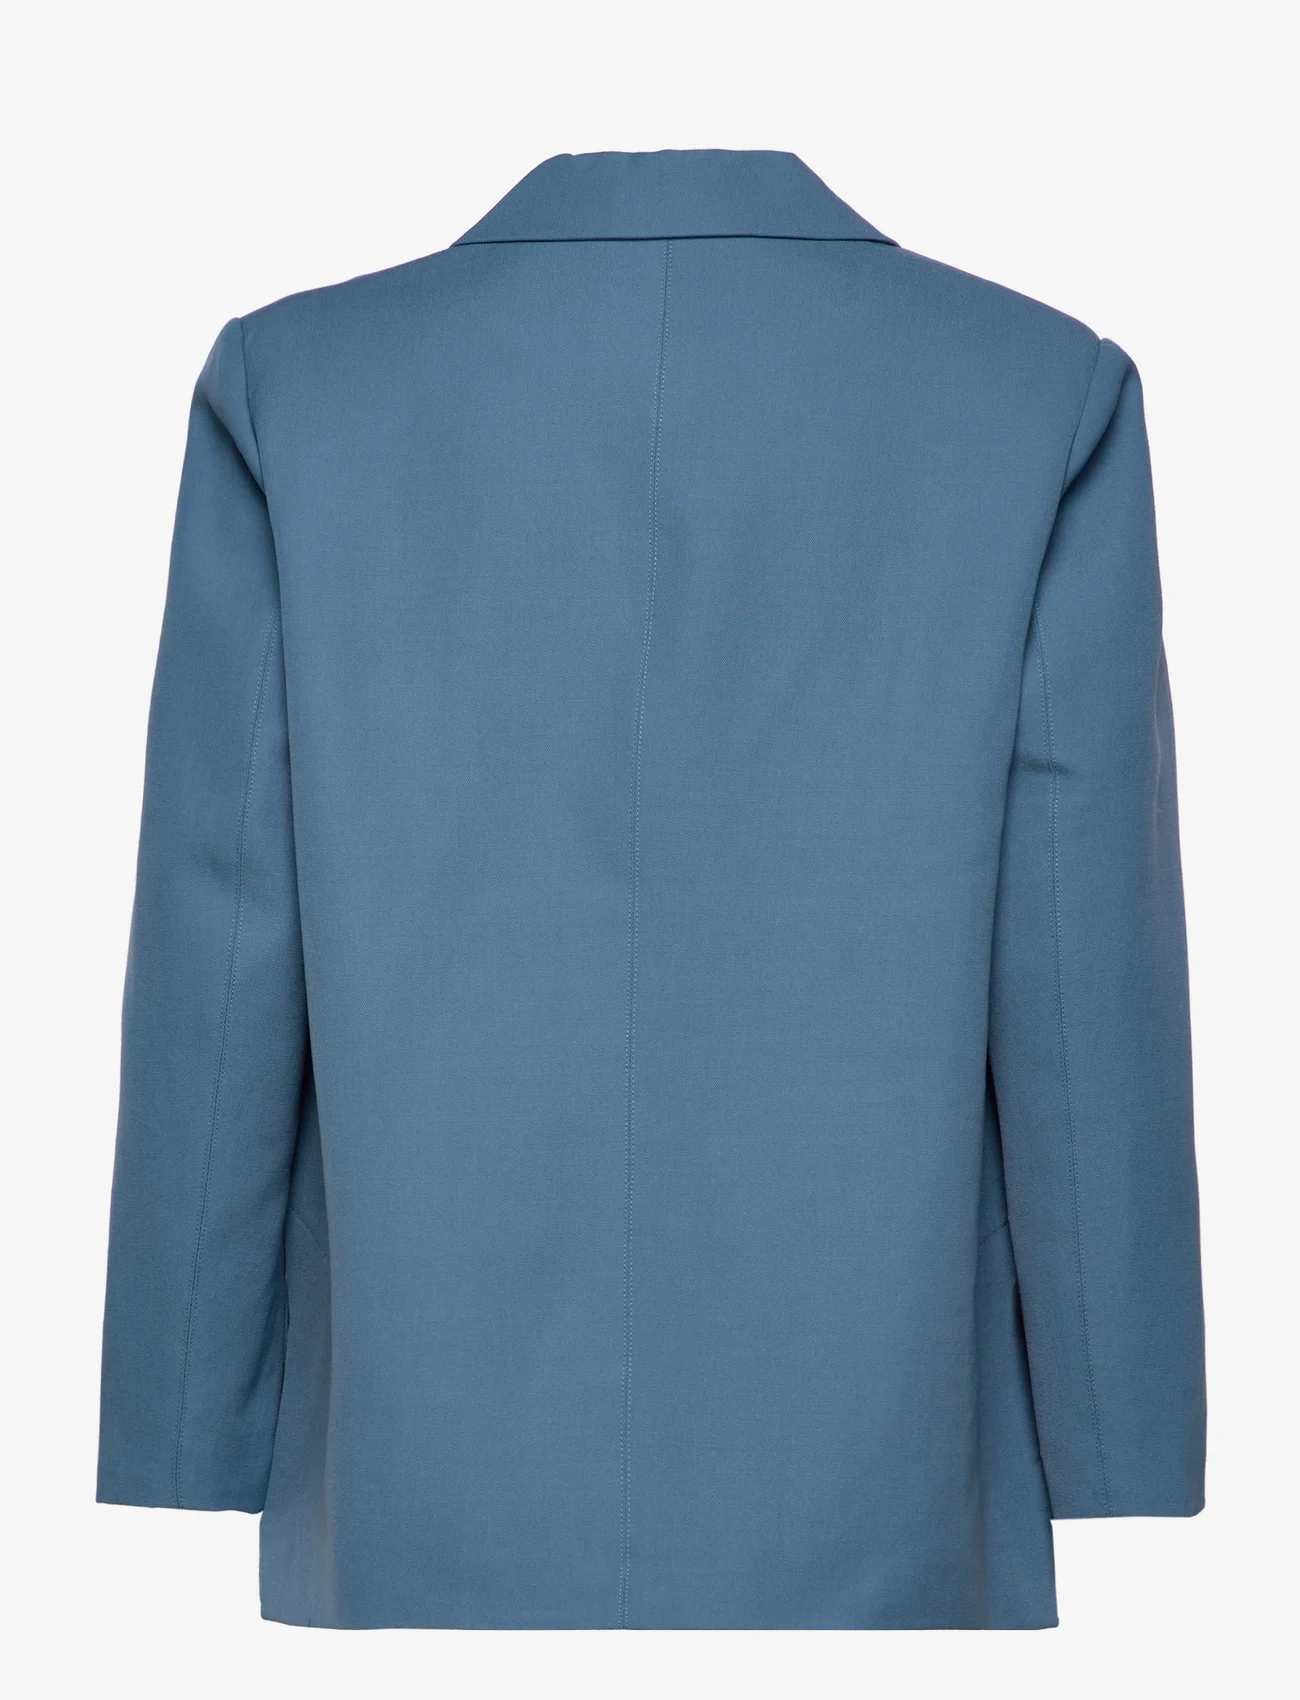 Fall Winter Spring Summer - Blue Line Blazer - party wear at outlet prices - aegean blue - 1